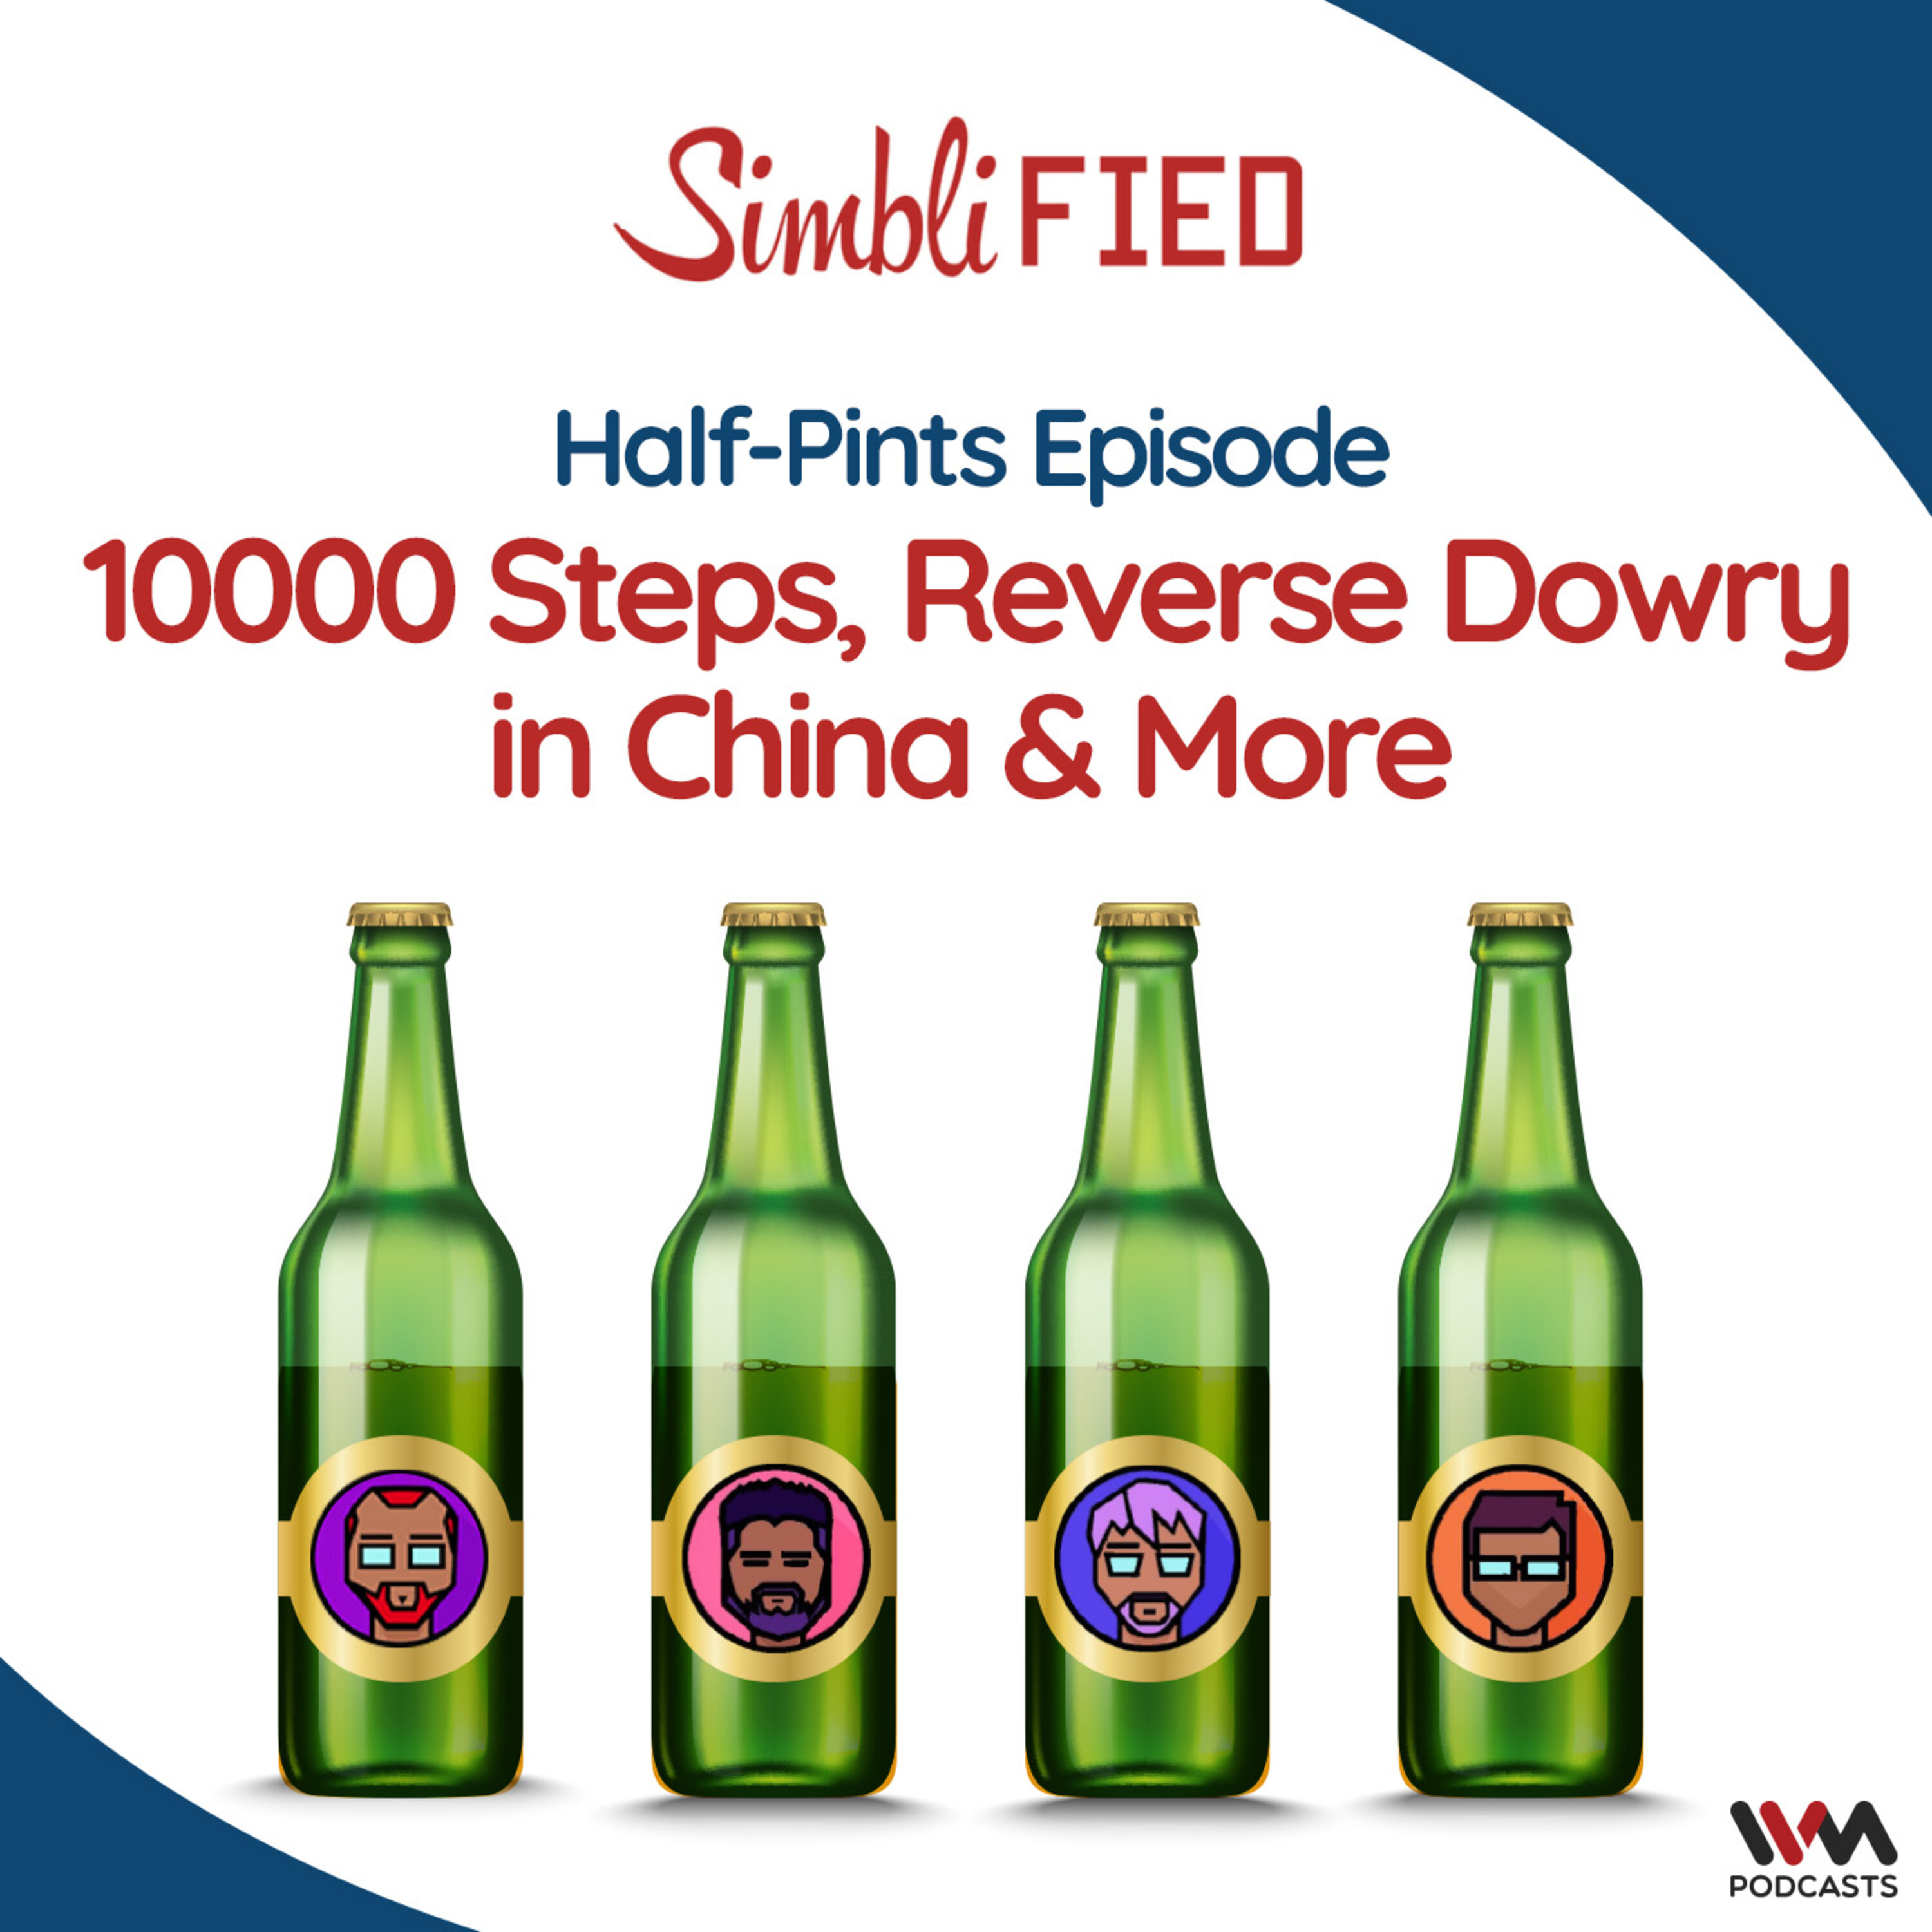 Half-pints episode: 10000 steps, reverse dowry in China and more